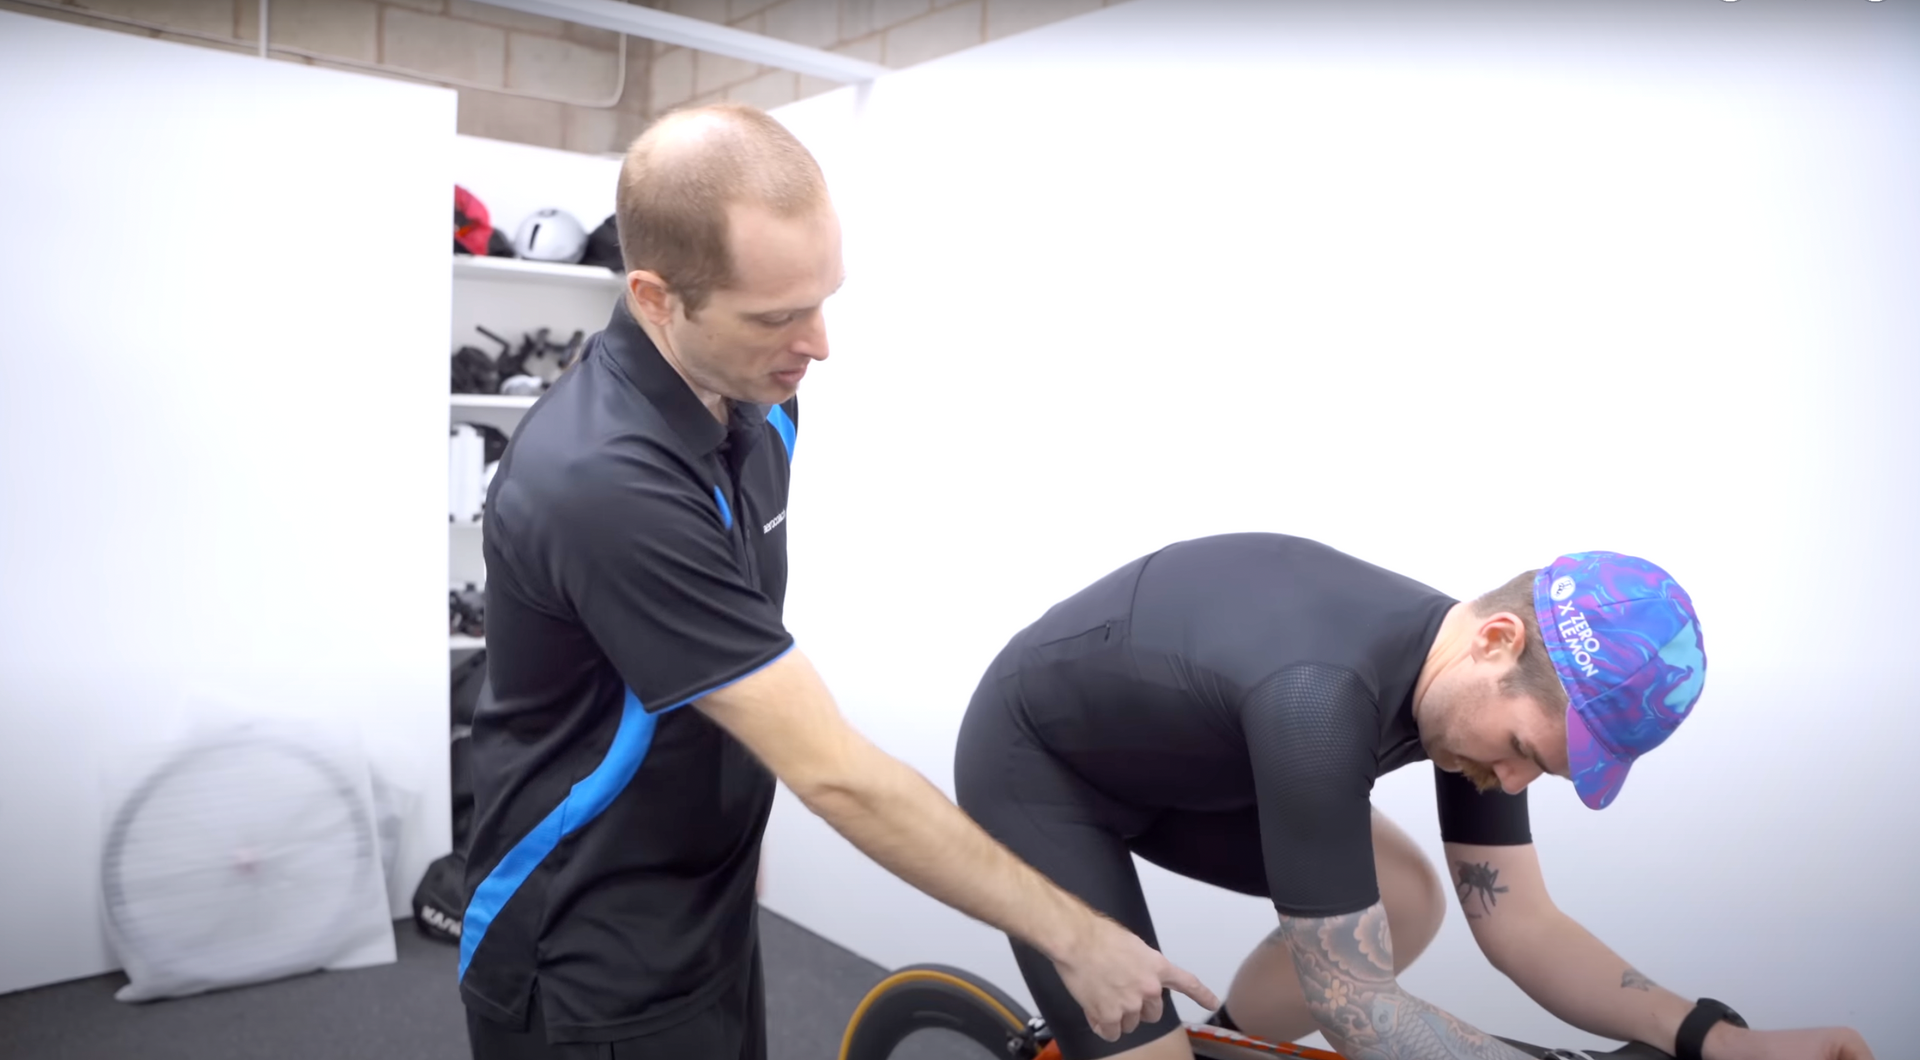 Dr Xavier Disley of AeroCoach & Chris Hall are performing a road bike fit at AeroCoach HQ